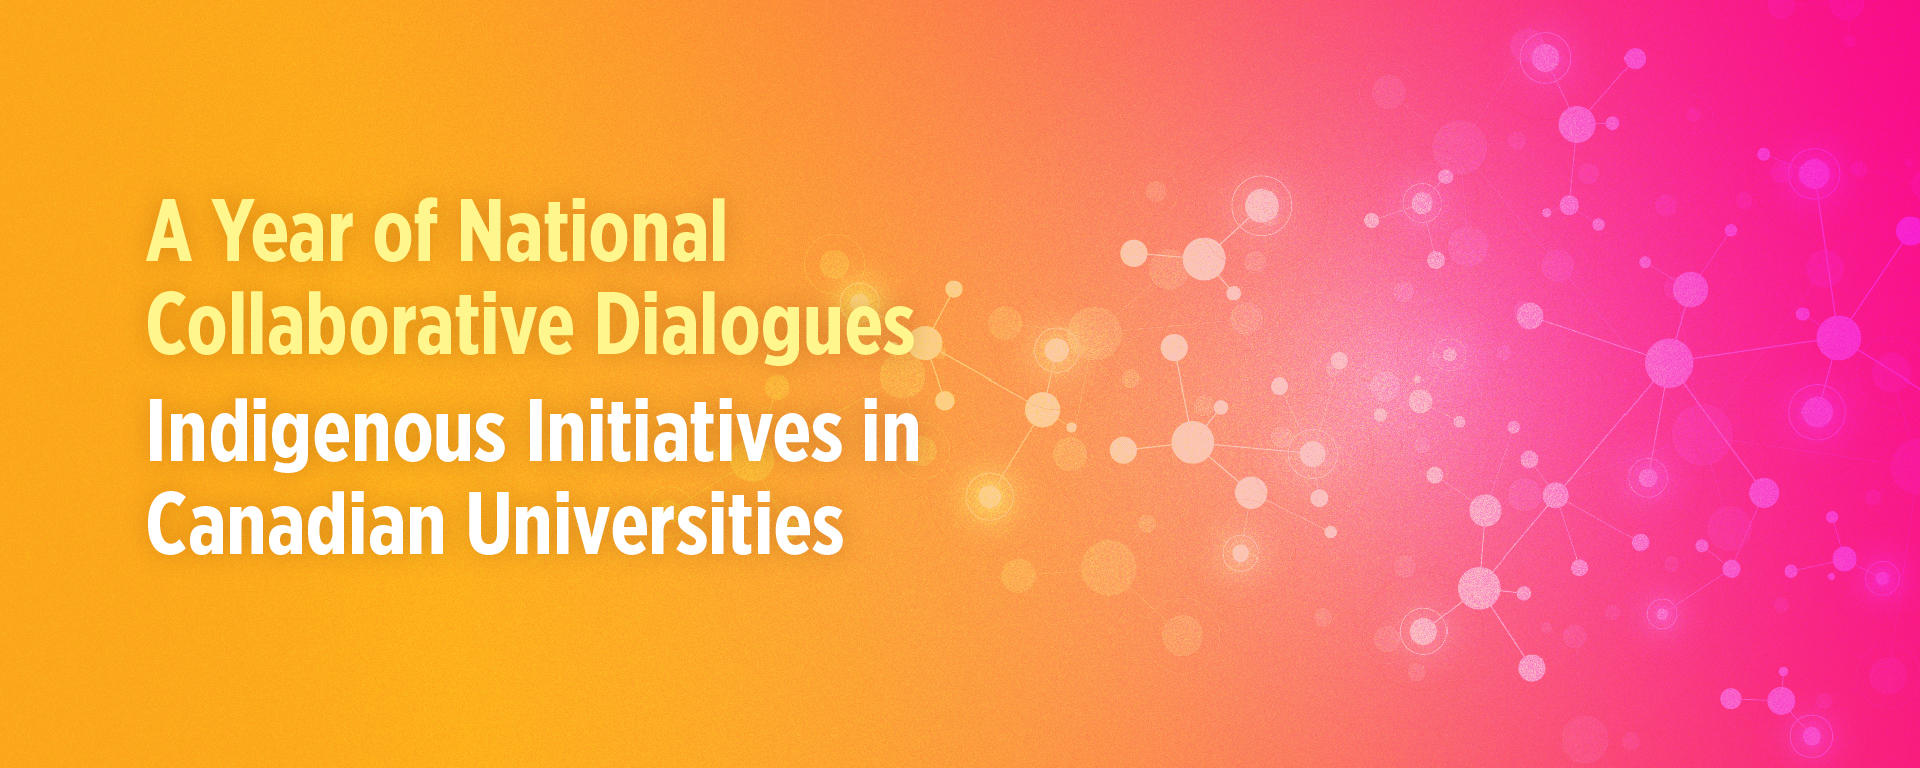 Text reads "A year of national collaborative dialogues. Indigenous Initiatives in Canadian Universities"